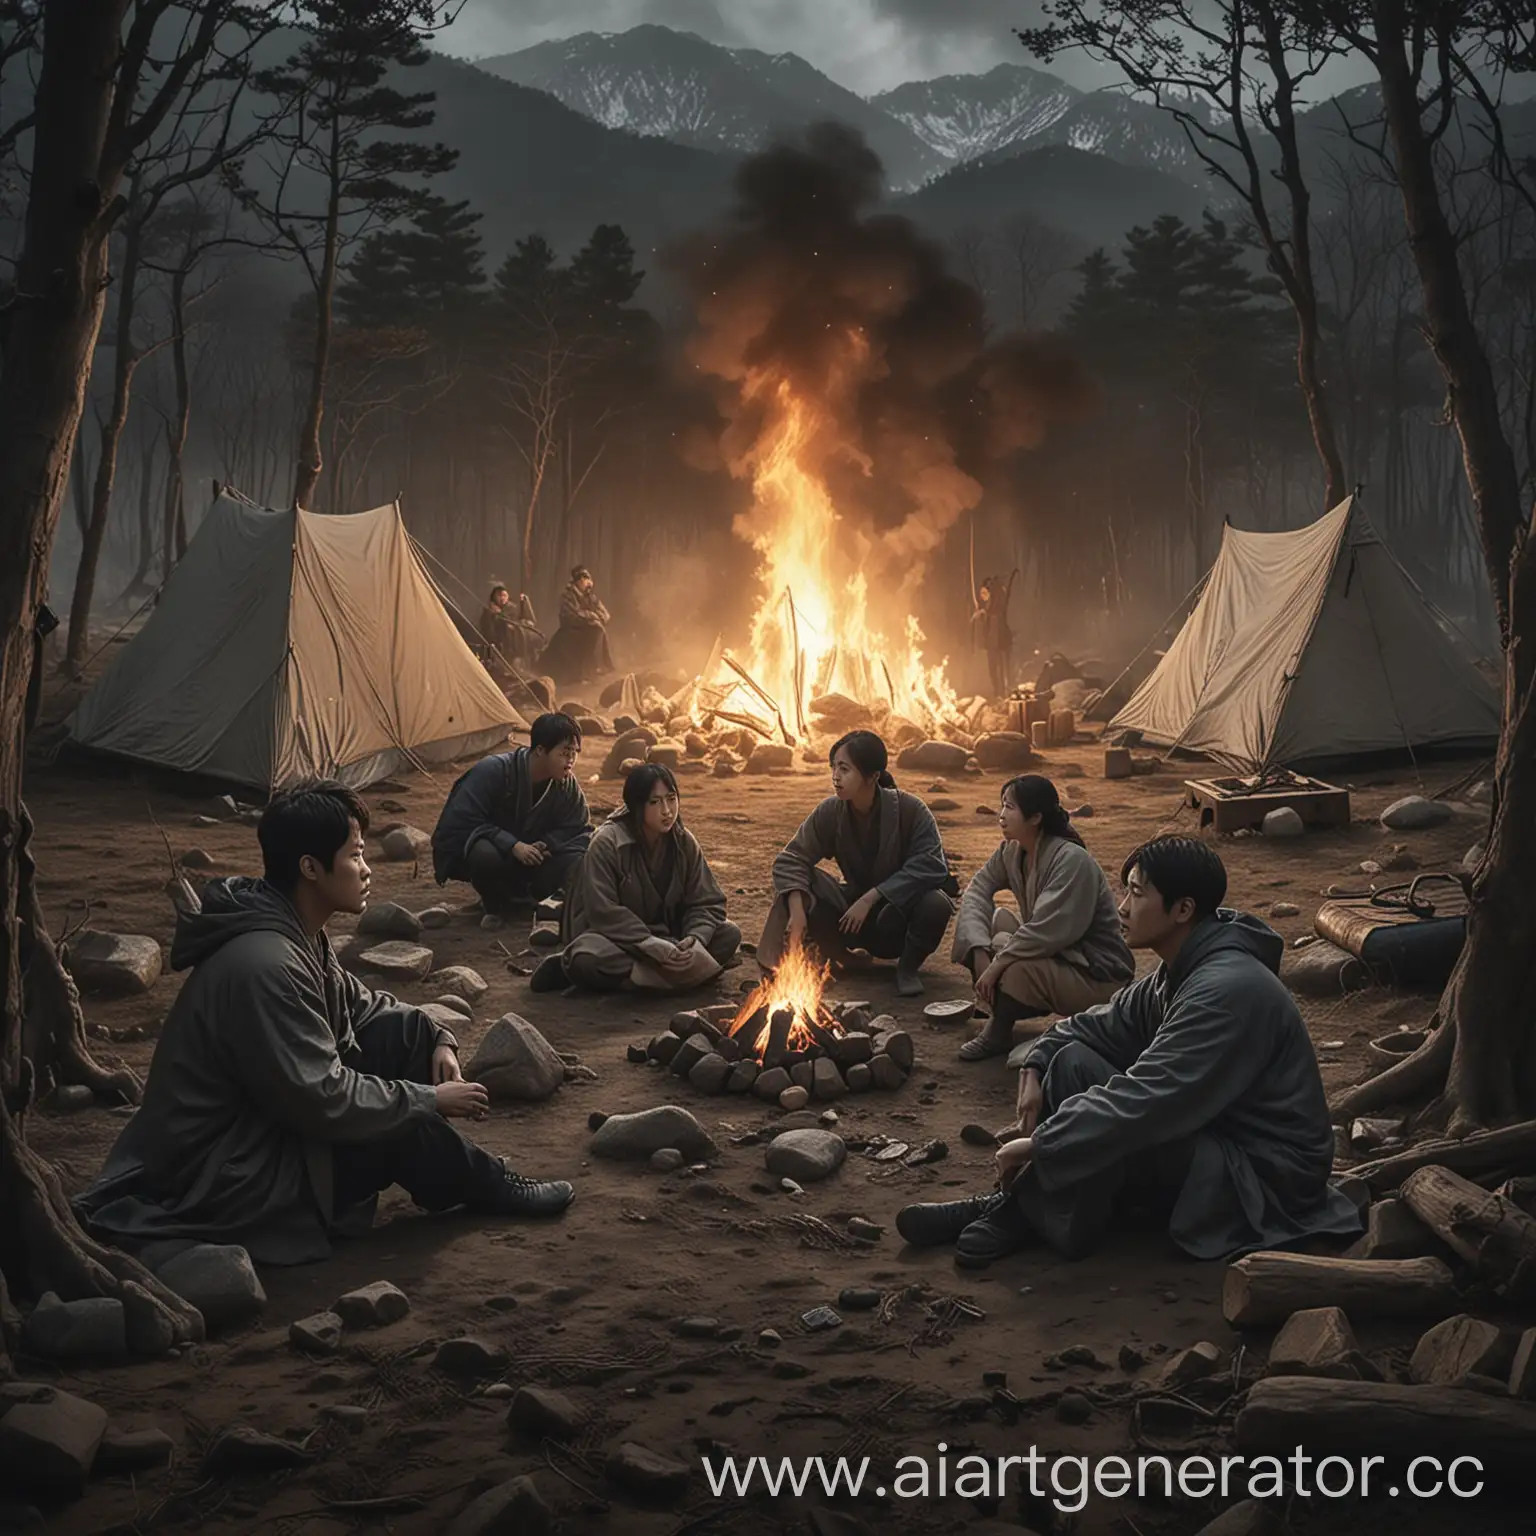 Mysterious-South-Korean-Mountain-Landscape-Worried-Characters-by-Campfire-Amidst-Eerie-Shadows